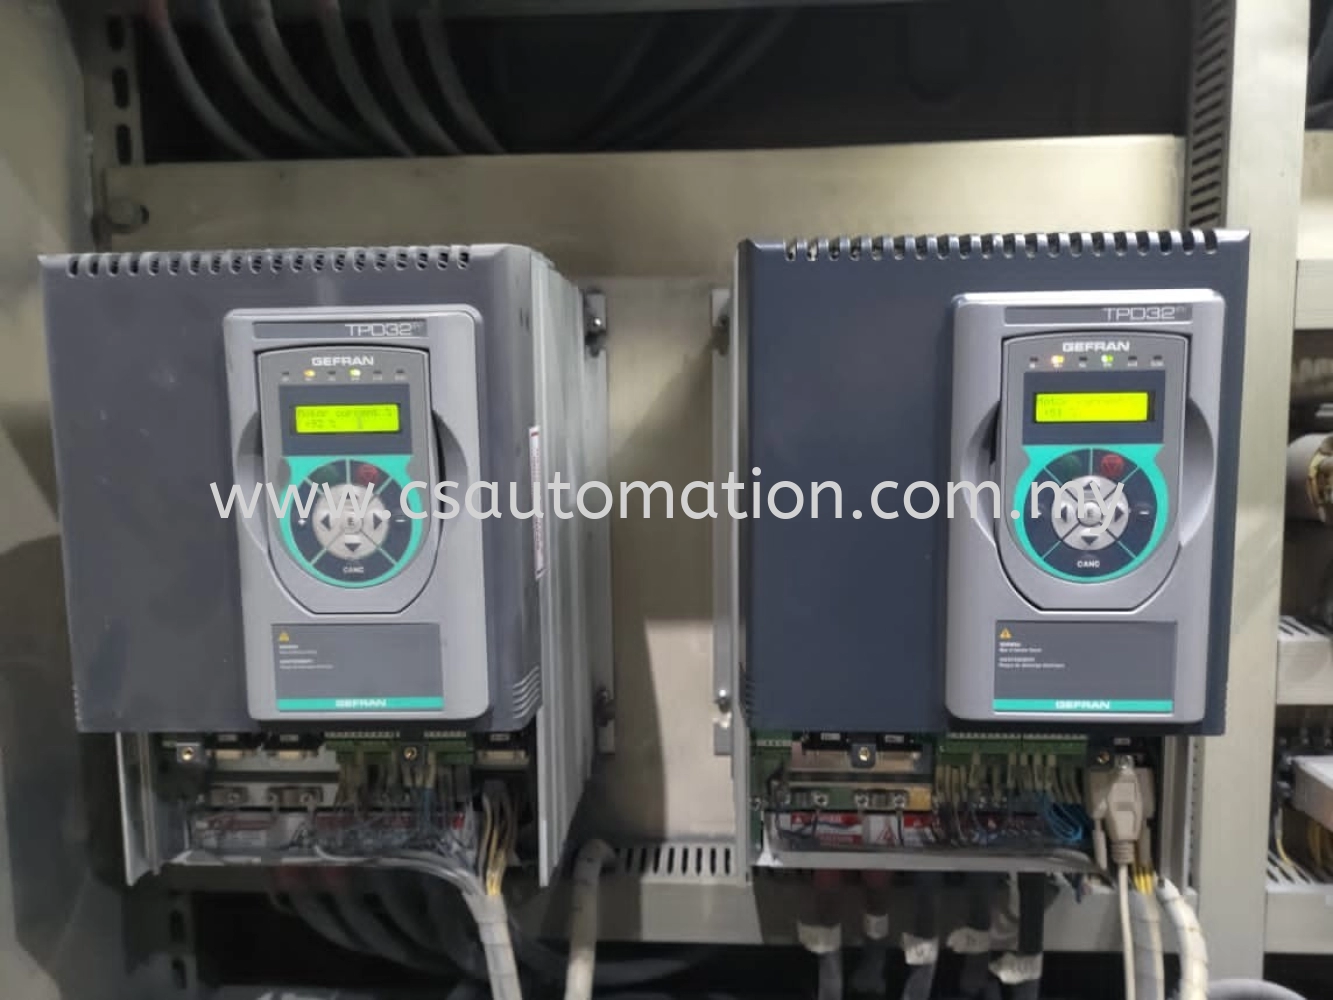 Gefran Siei TYPACT Dc Drive upgrade to New model TPD32-EV